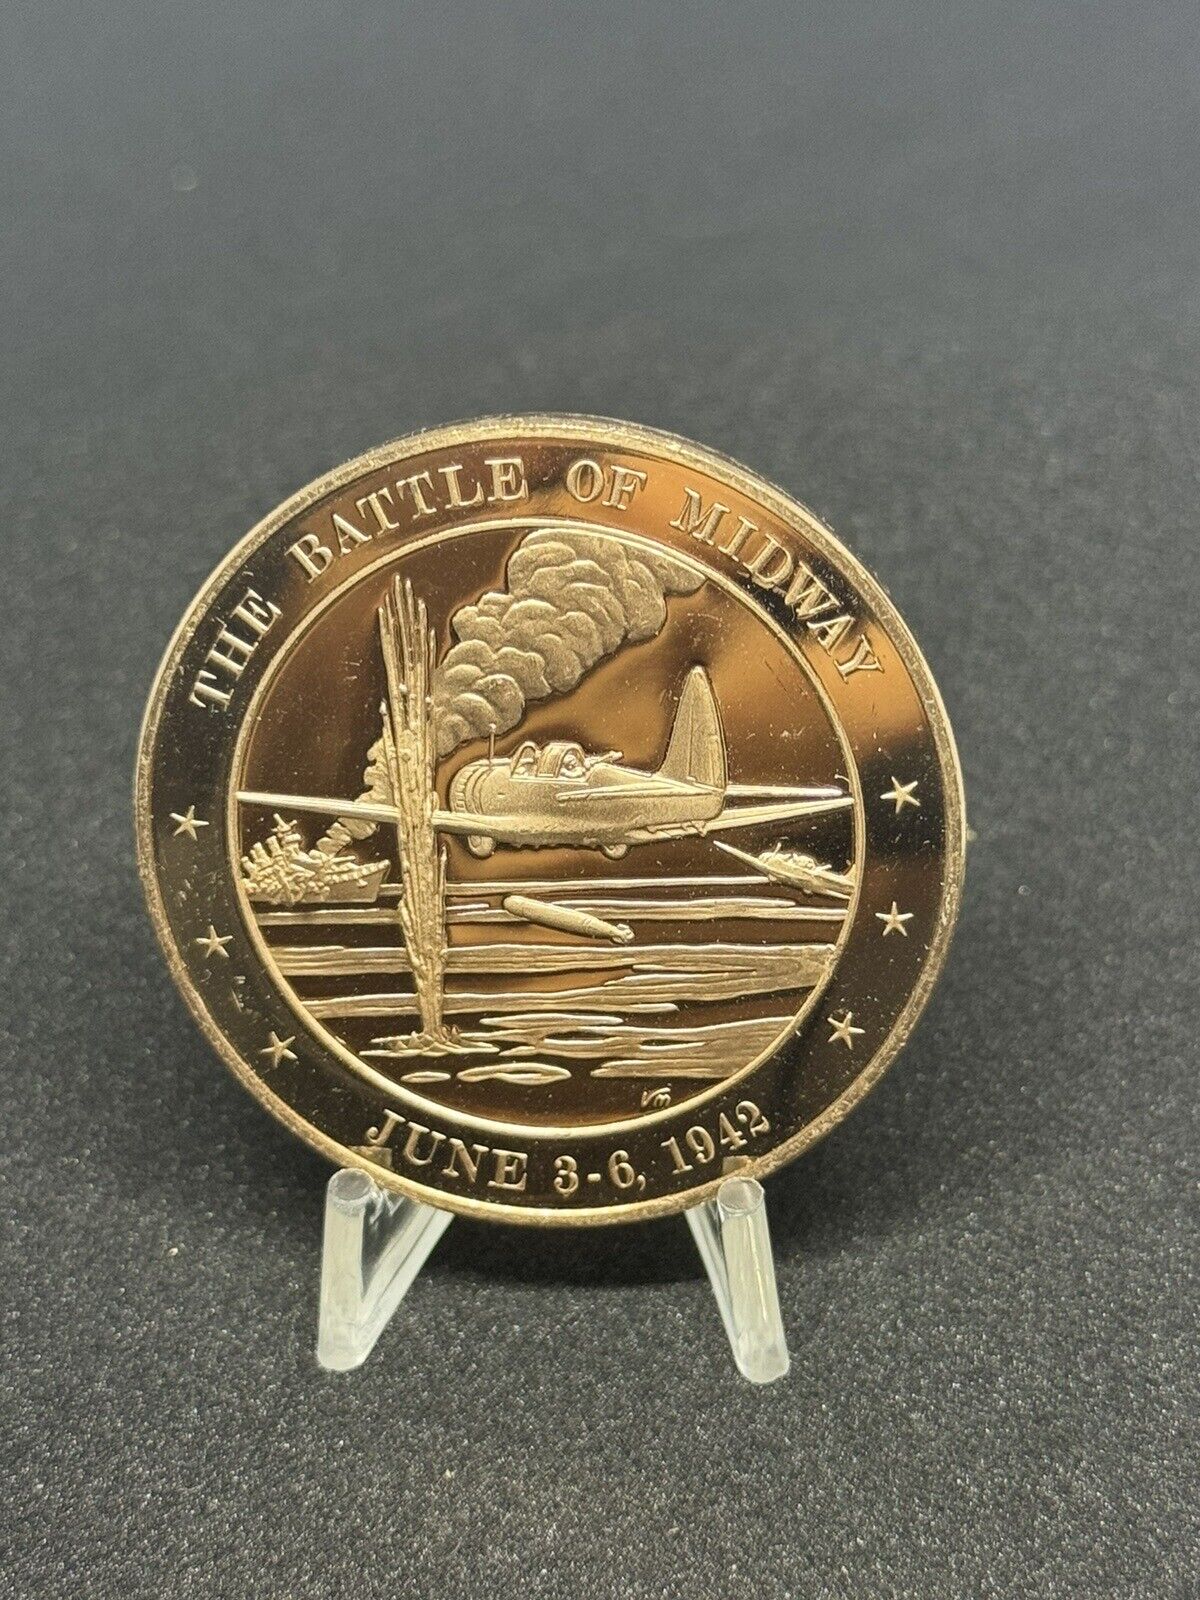 The Battle of Midway coin - June 3-6, 1942 A28